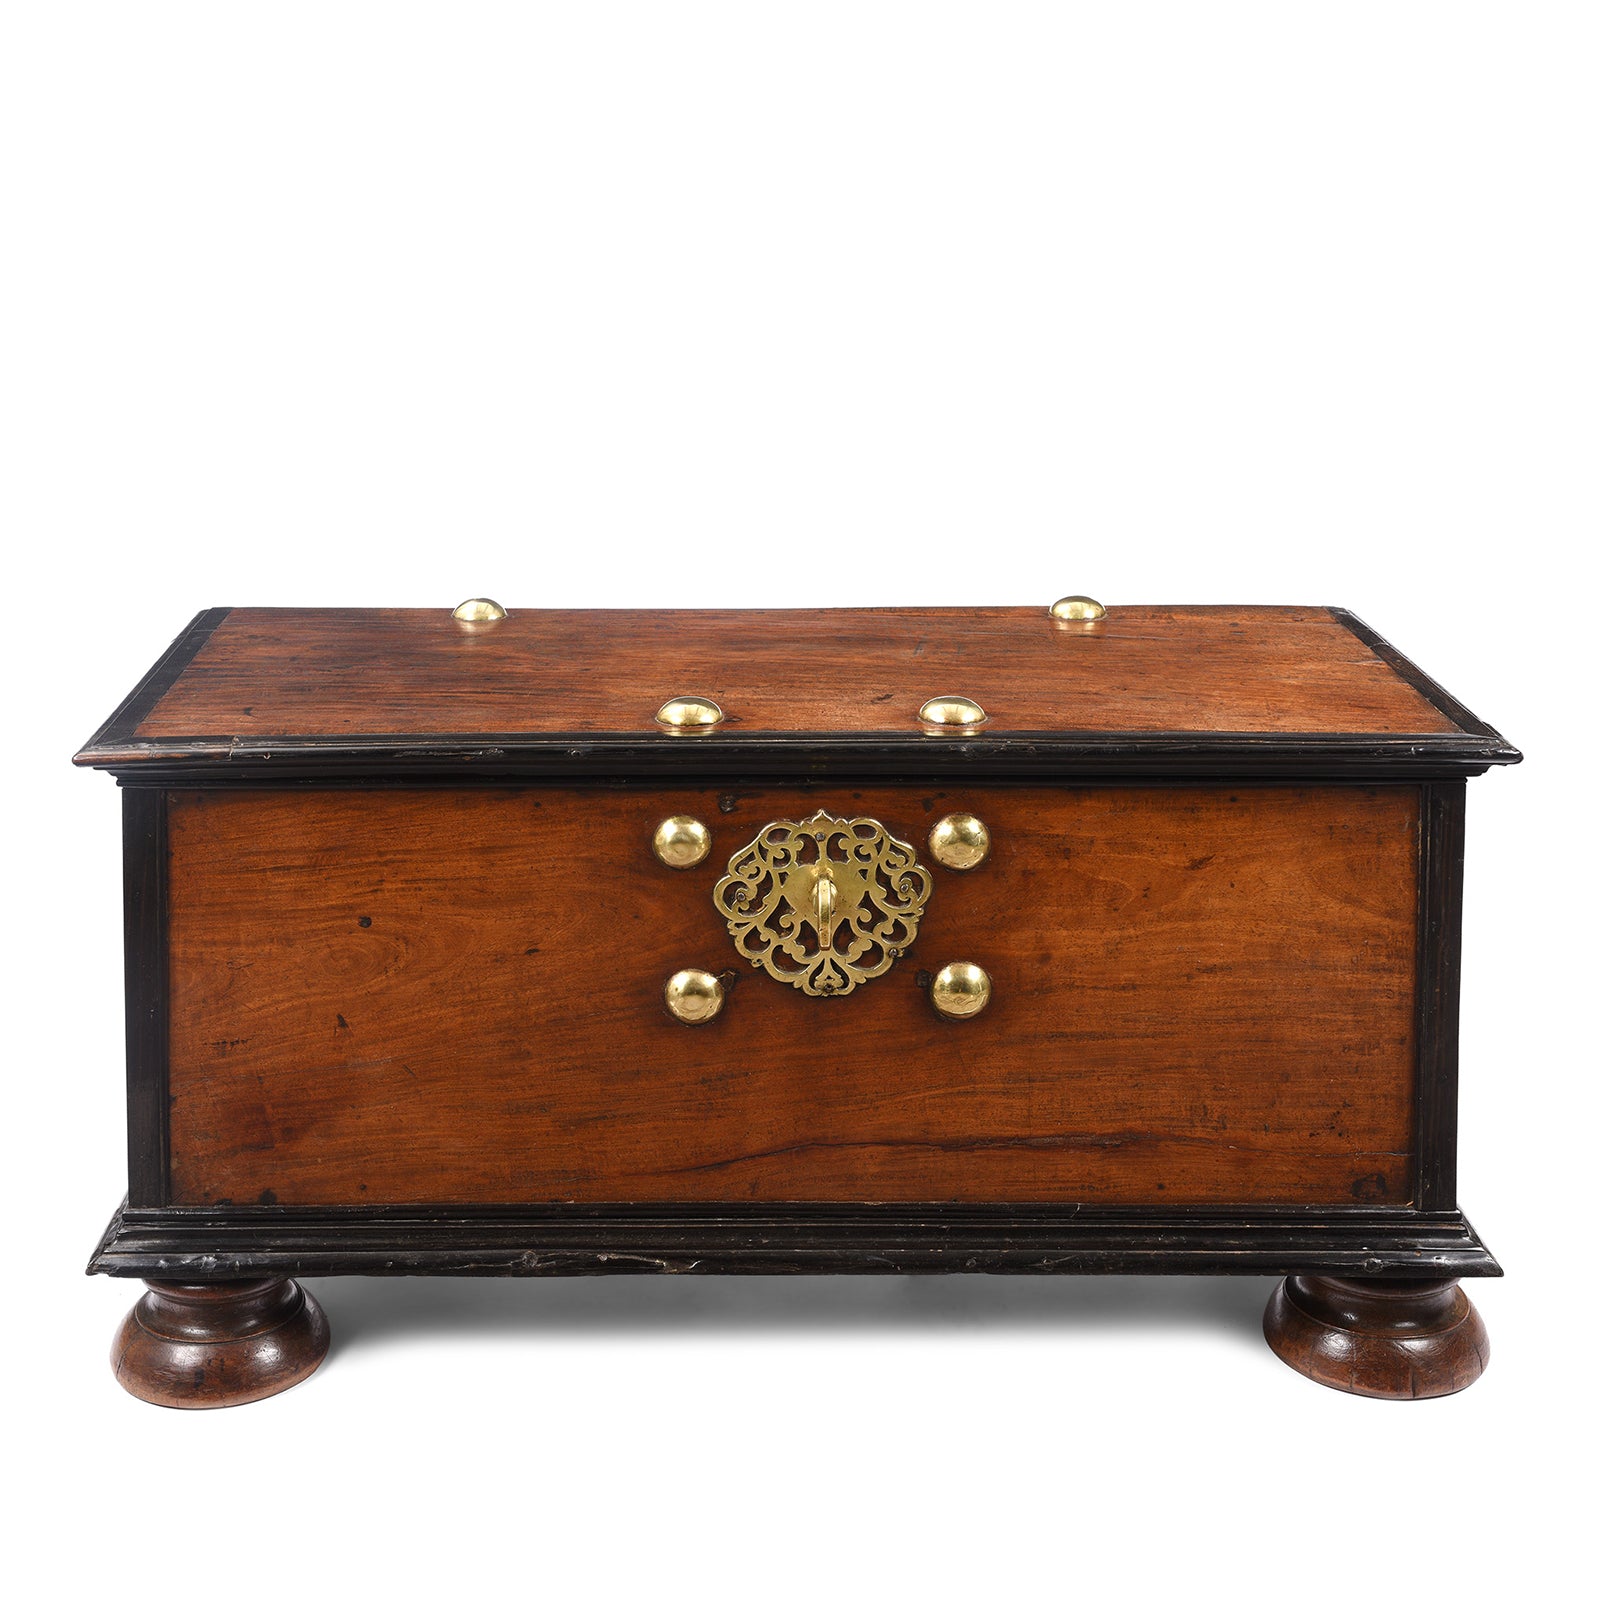 Antique Indo-Dutch Colonial Chest on Stand From Ceylon -18th Century | Indigo Antiques